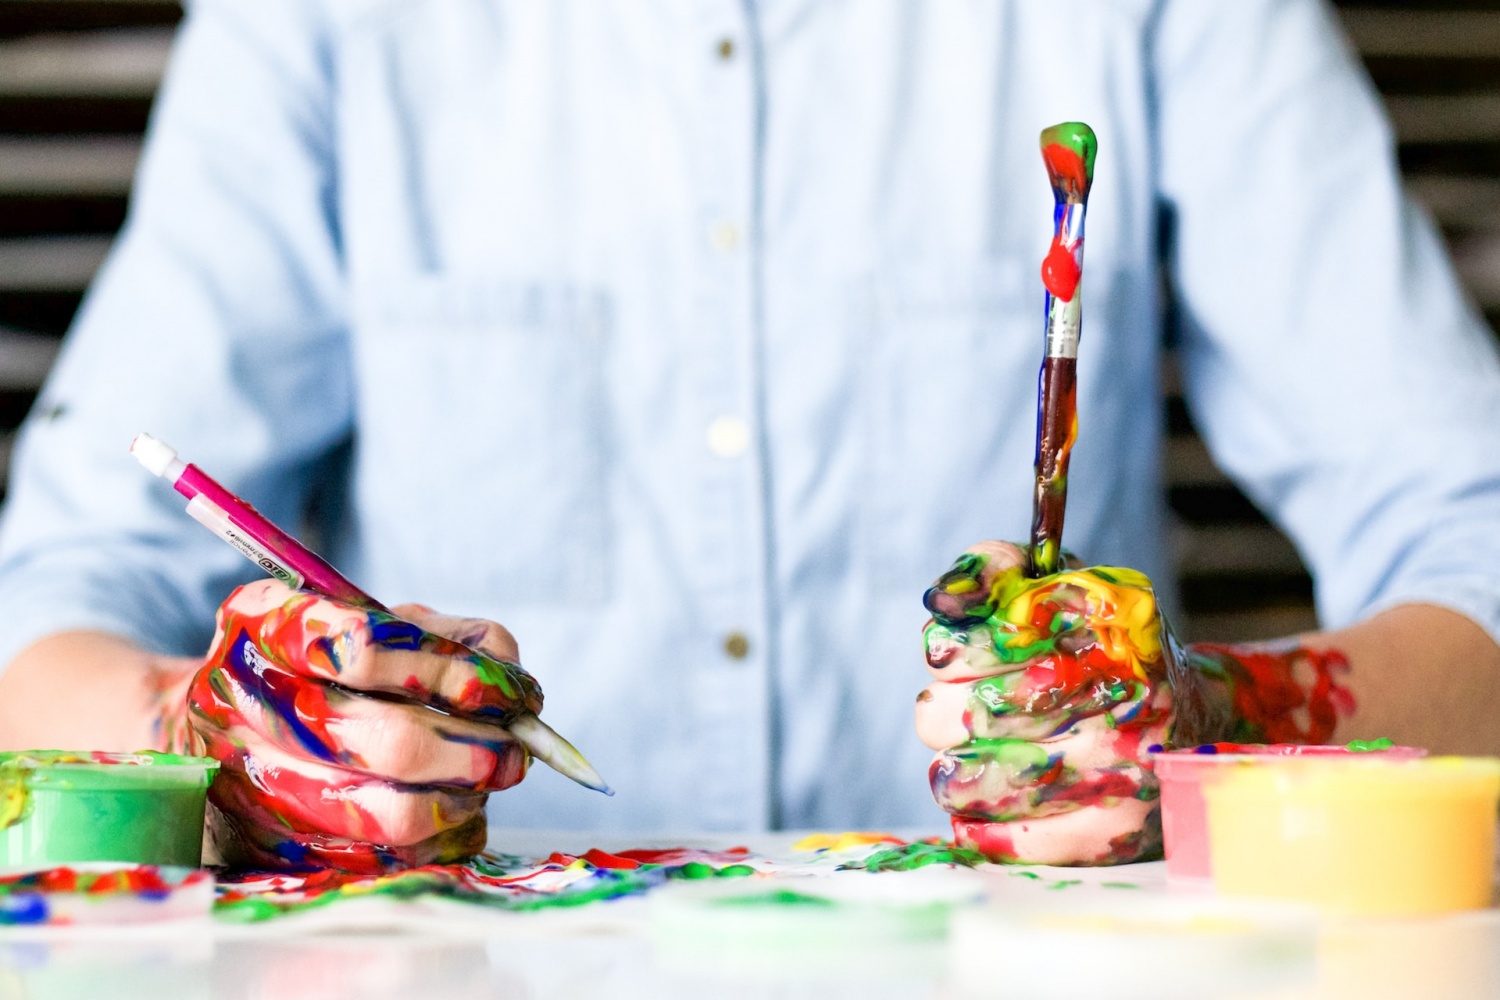 How Does Art Therapy Work?